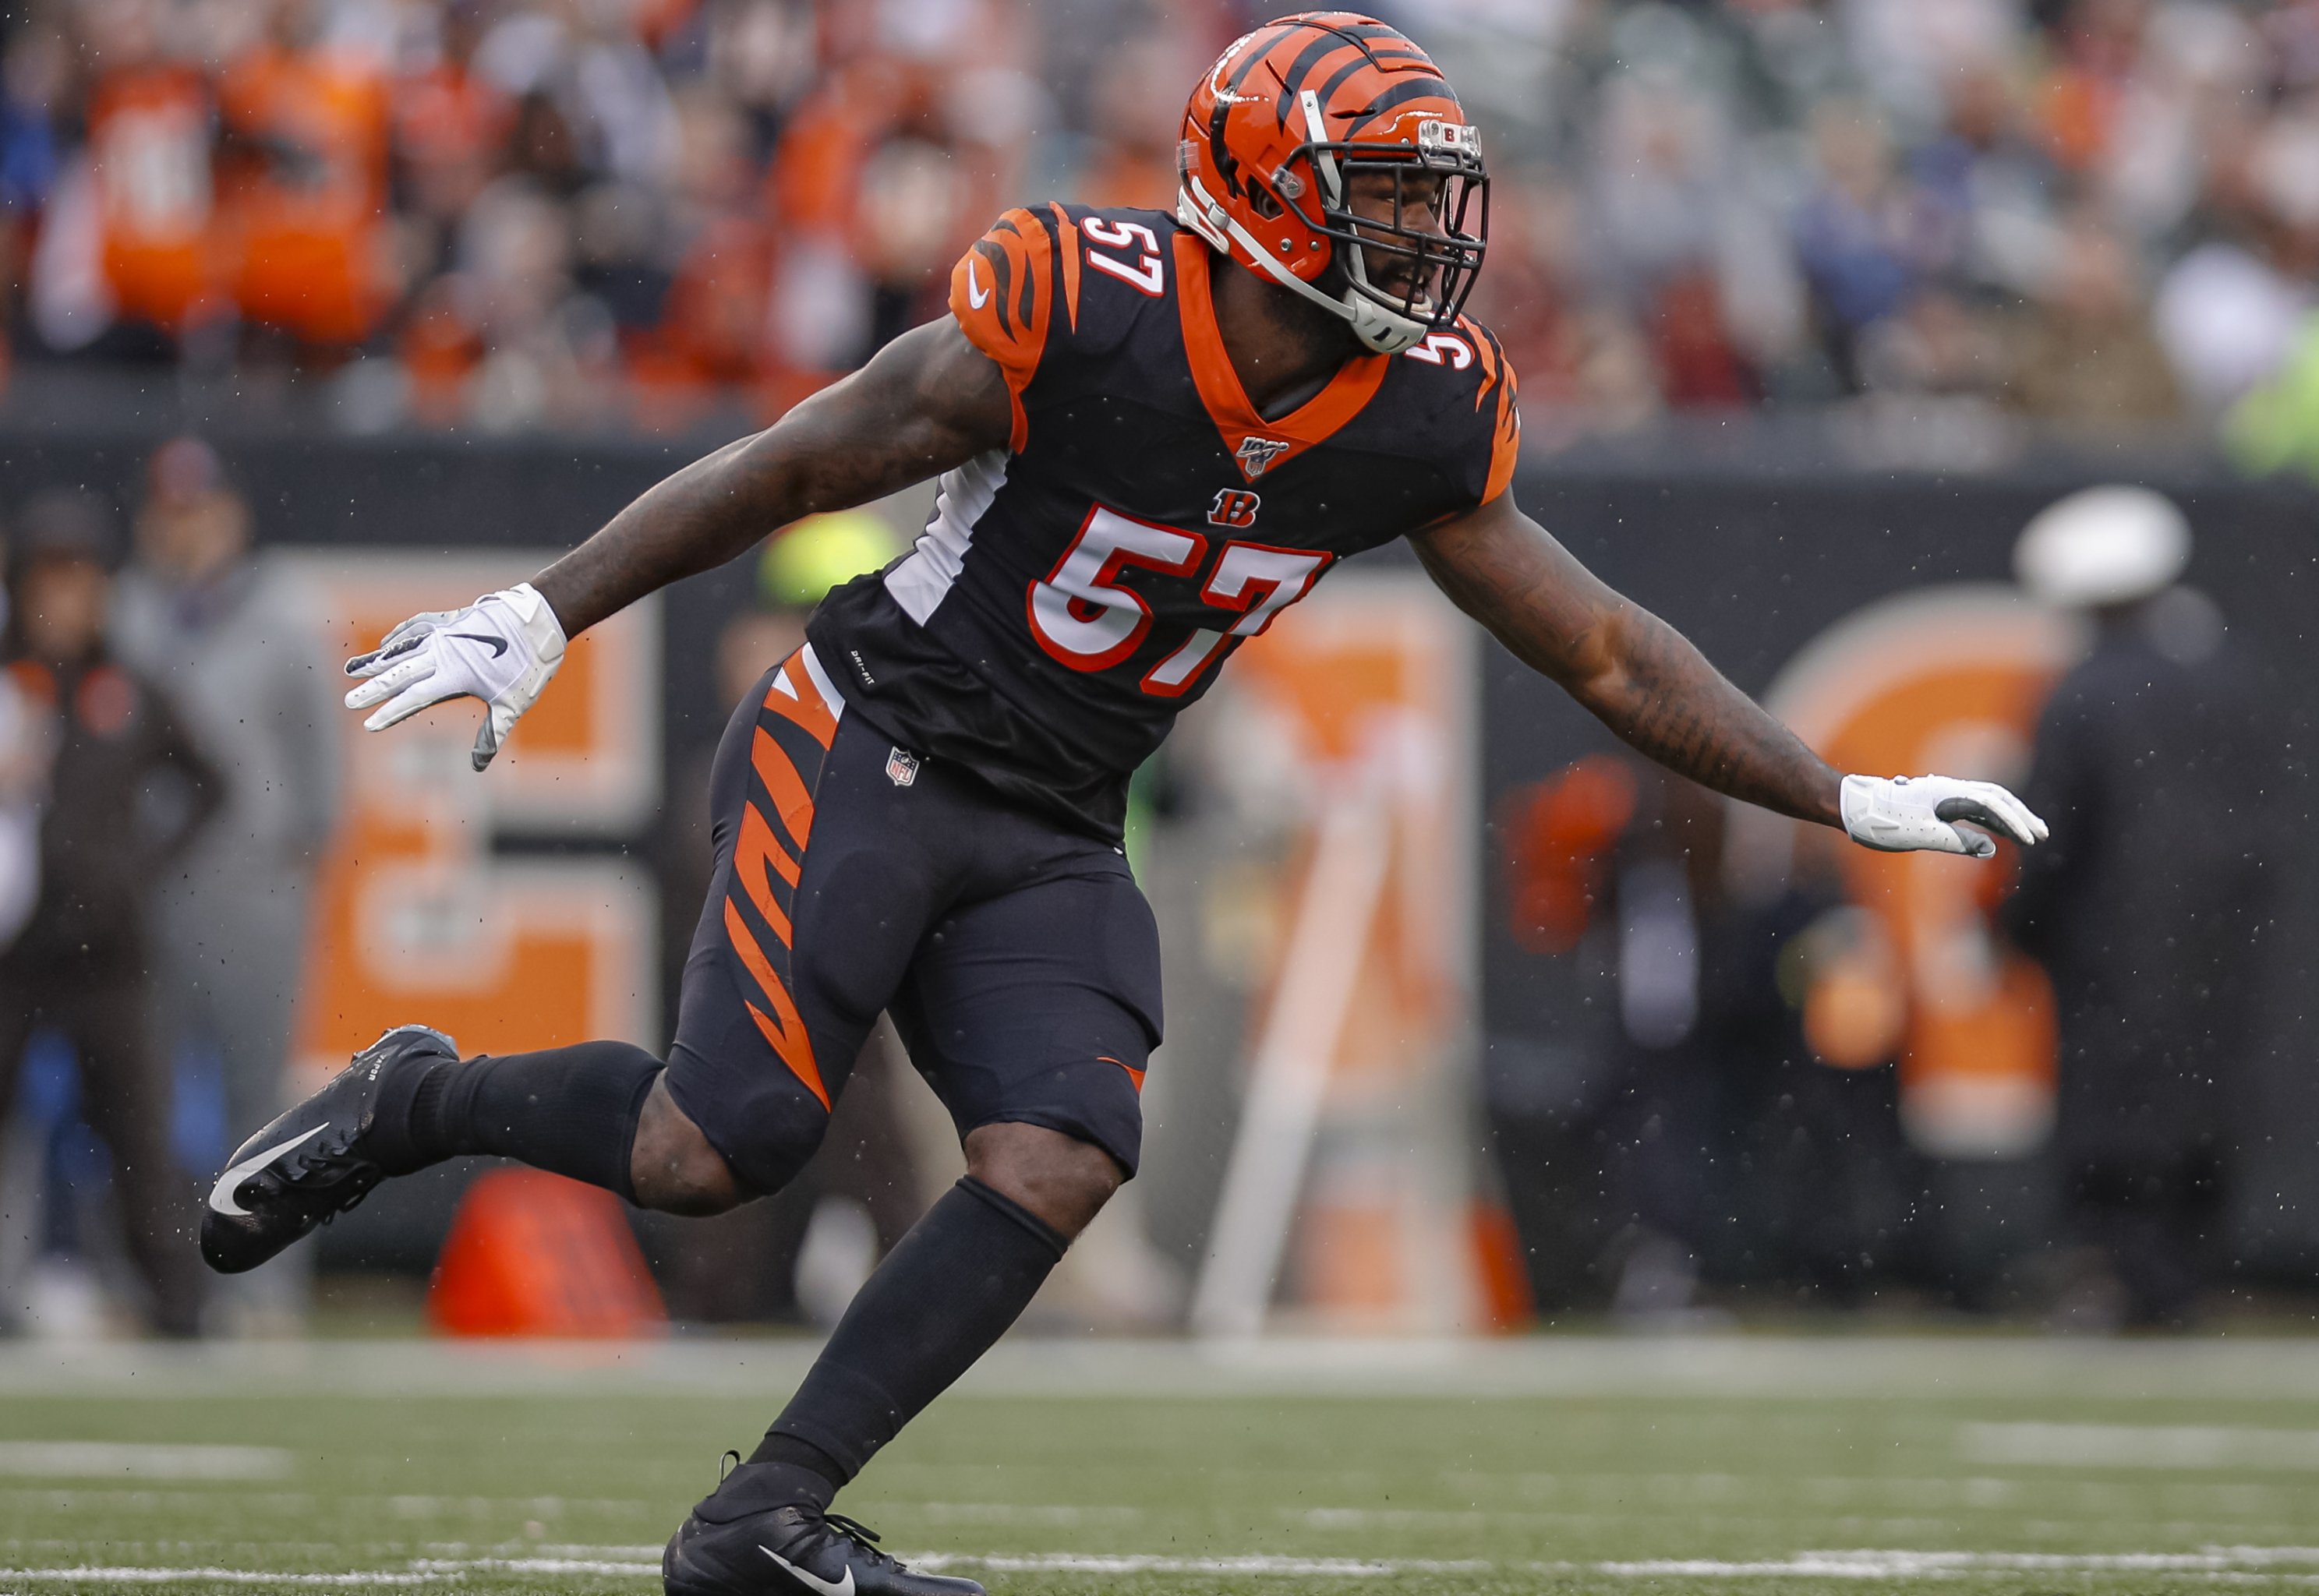 Murphy earns an A grade from the Athletic : r/bengals